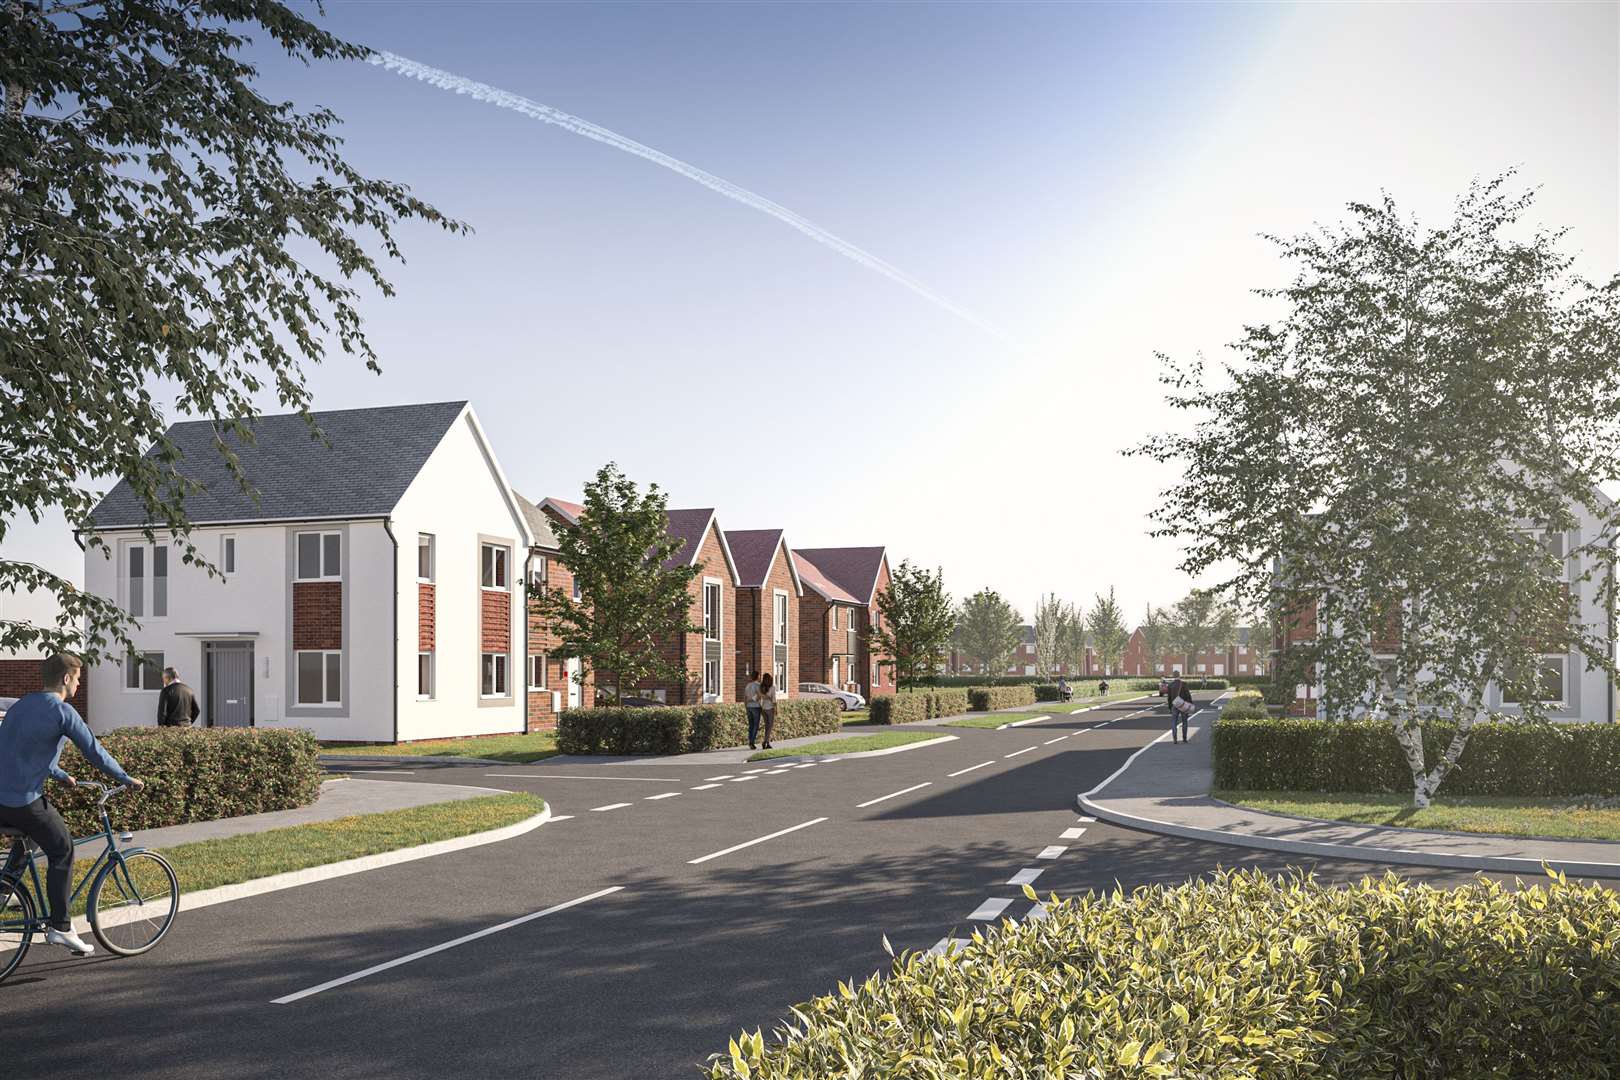 A computer generated image of what the new St Modwen homes in Ditton might look like